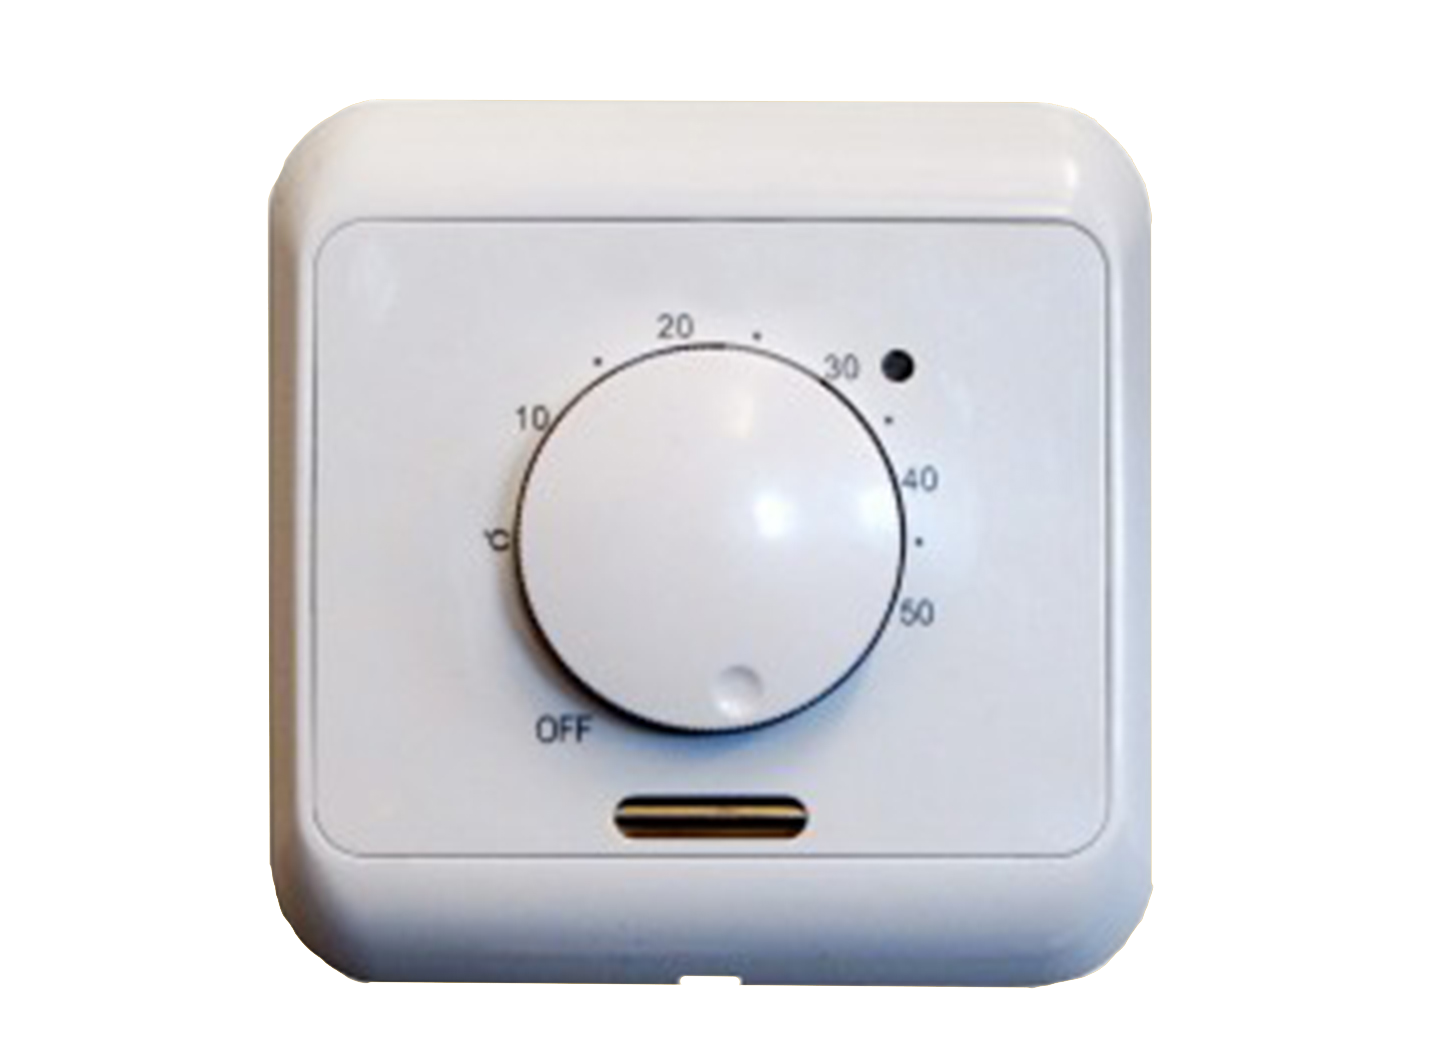 ELECTRONIC ROOM THERMOSTAT - Wundatrade